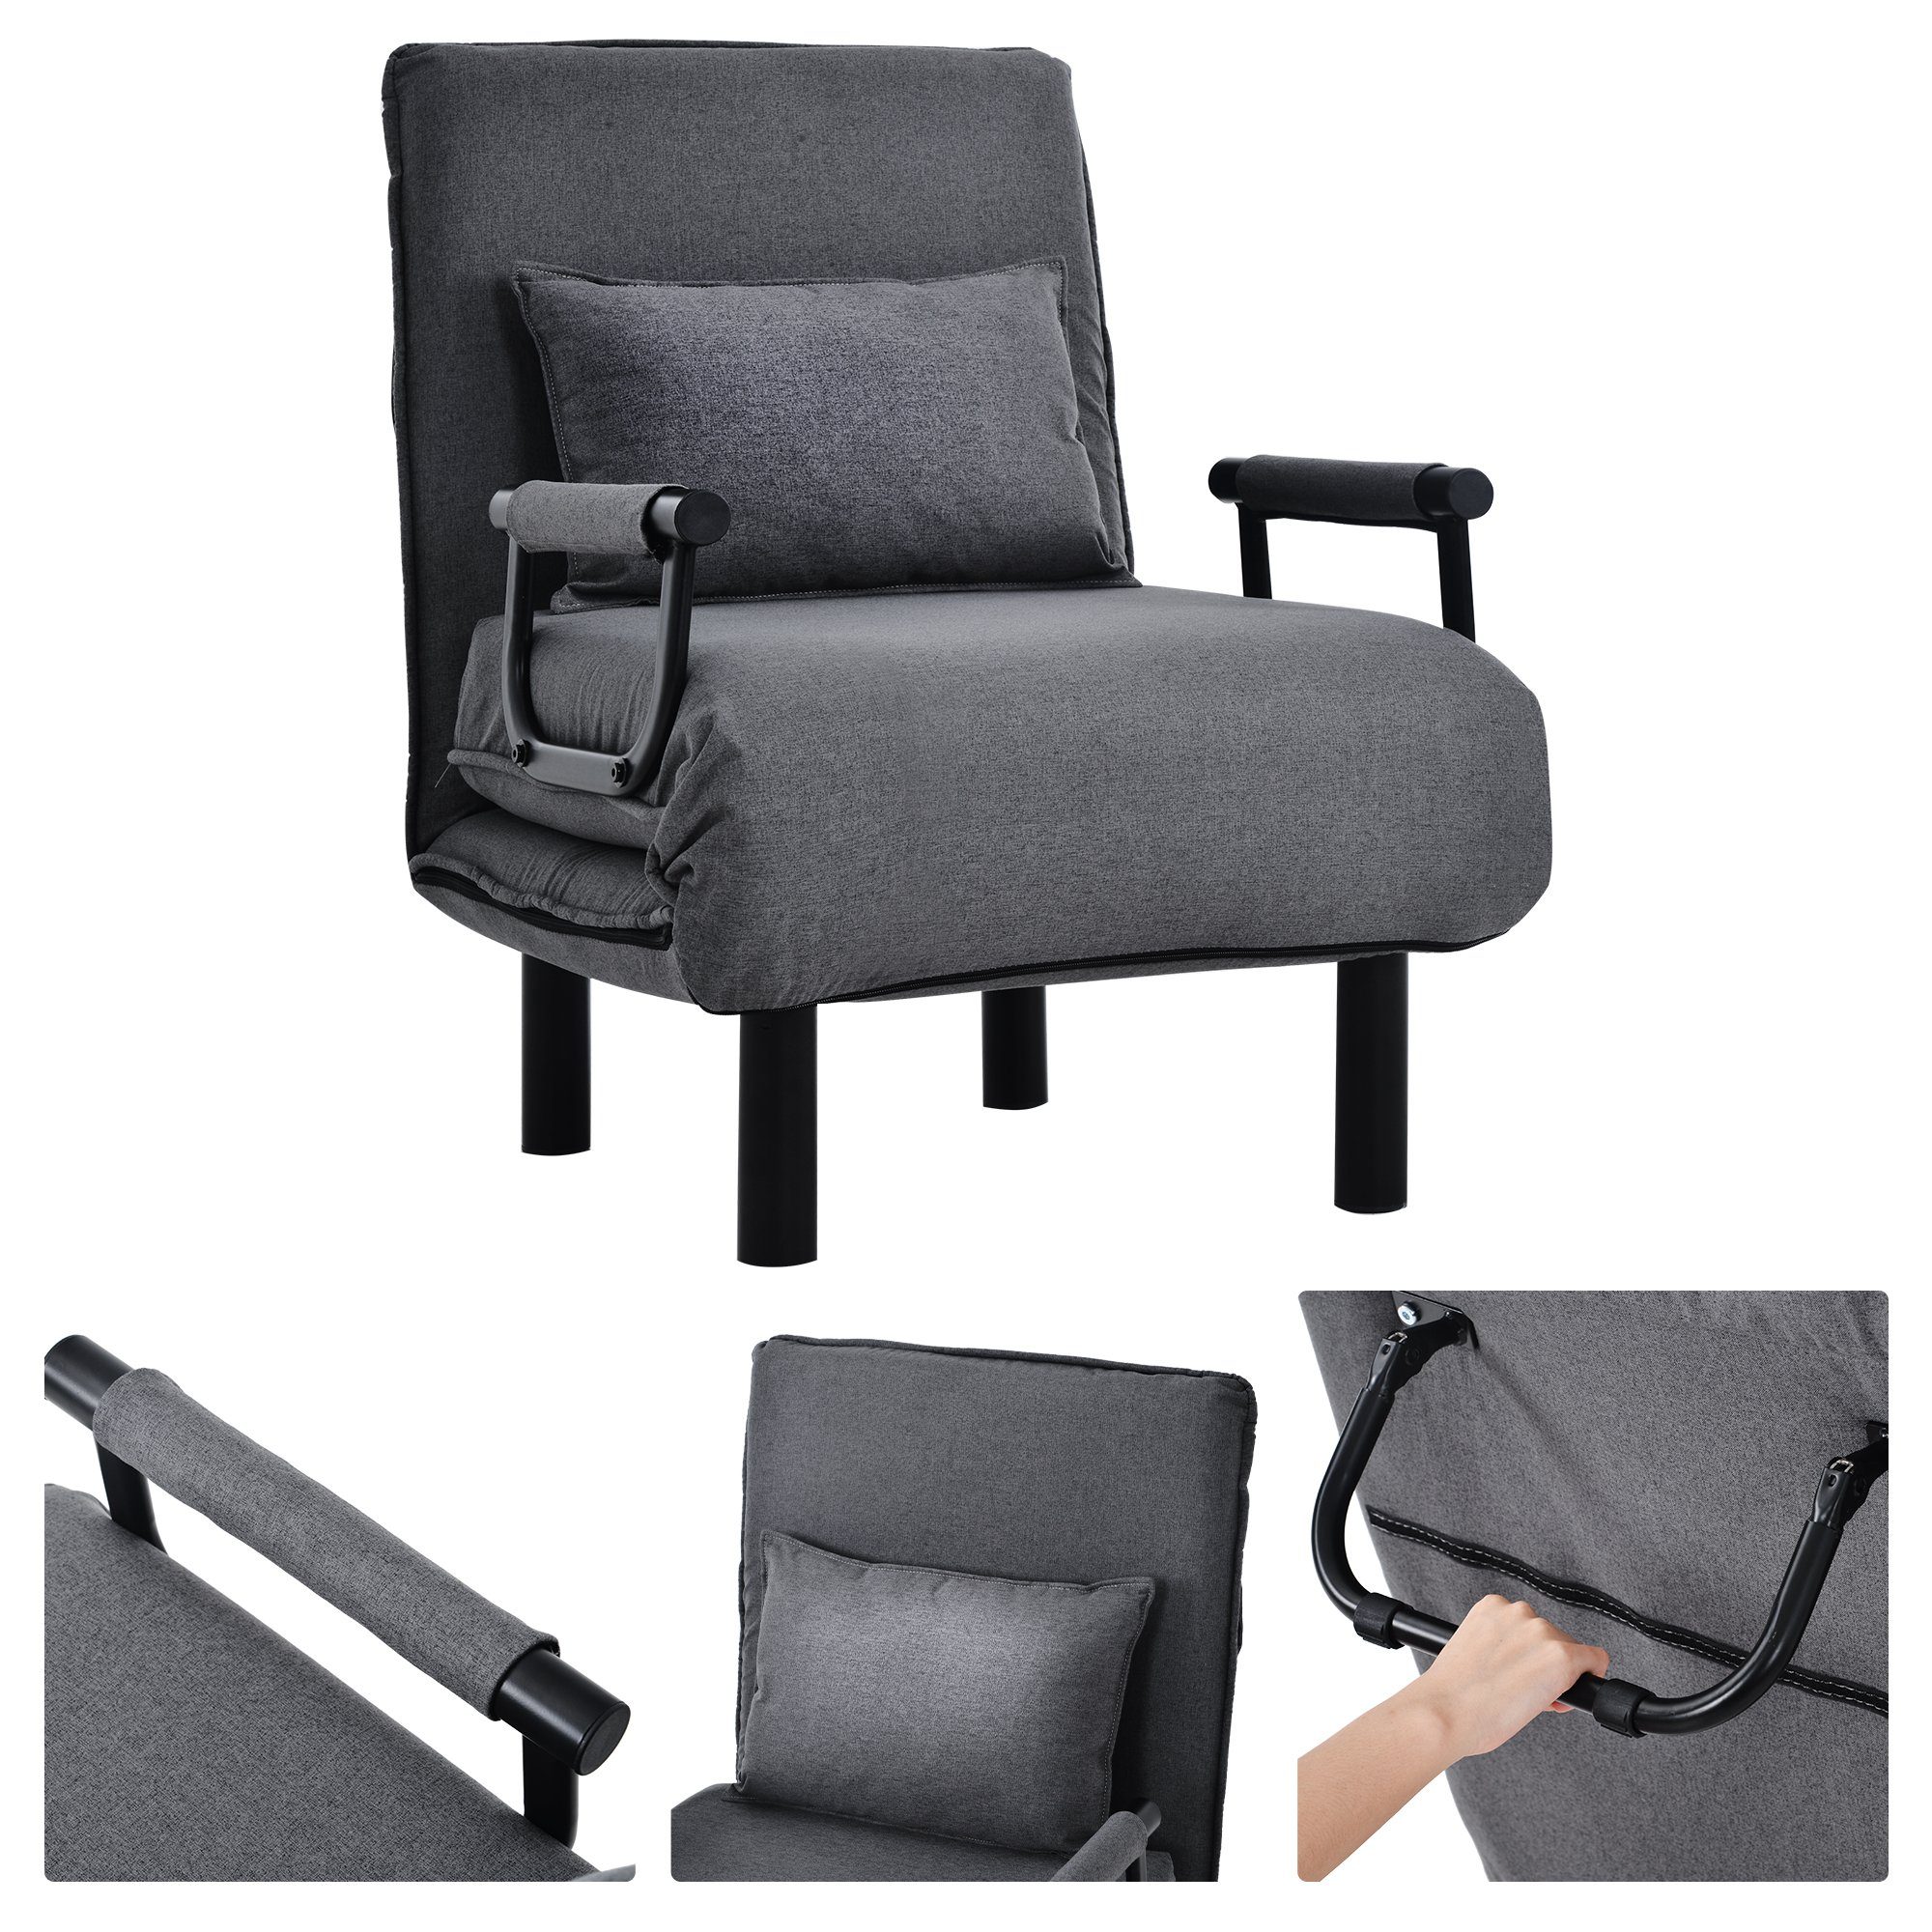 Schlafsessel, mit Relaxfunktion mit JOIVI Set, Relaxsessel, Schlafsofa Schlafsofa Grau 1-er Kissen, 2-in-1 faltbares